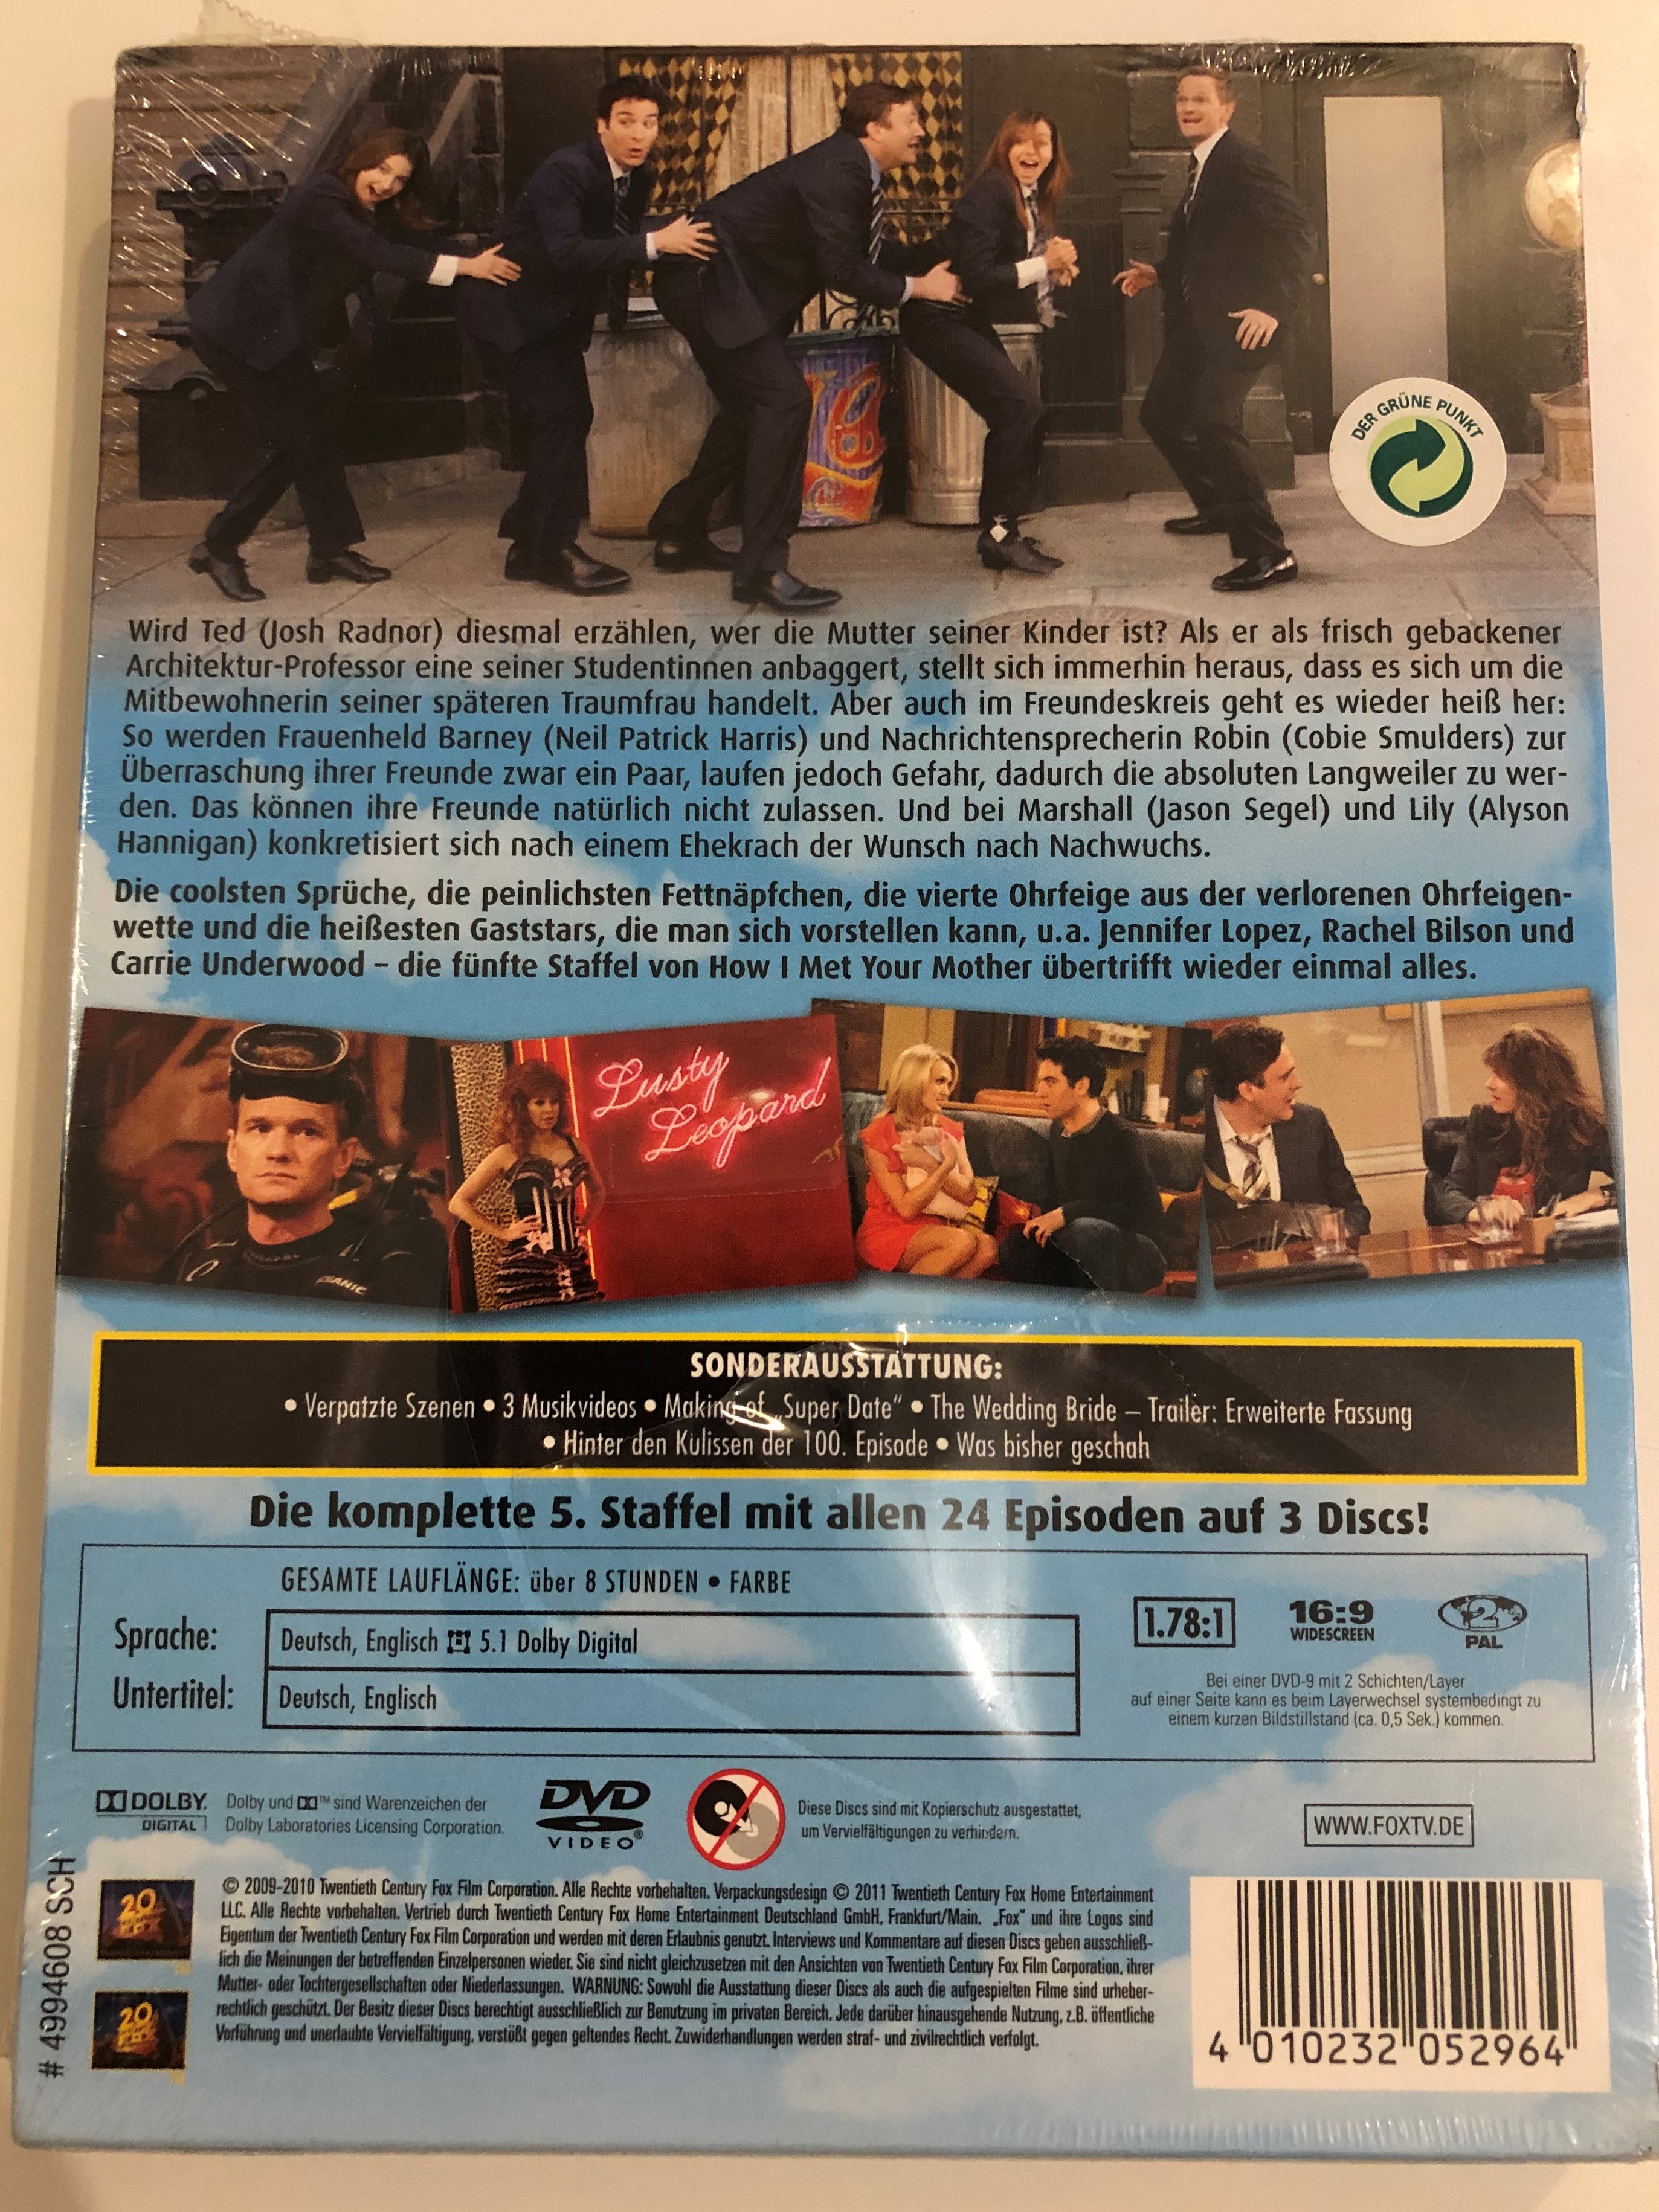 How I met your Mother Season 5 DVD 2010 The Complete S5 on 3 discs /  Created by Carter Bays, Craig Thomas / Starring: Josh Radnor, Jason Segel,  Cobie Smulders, Neil Patrick